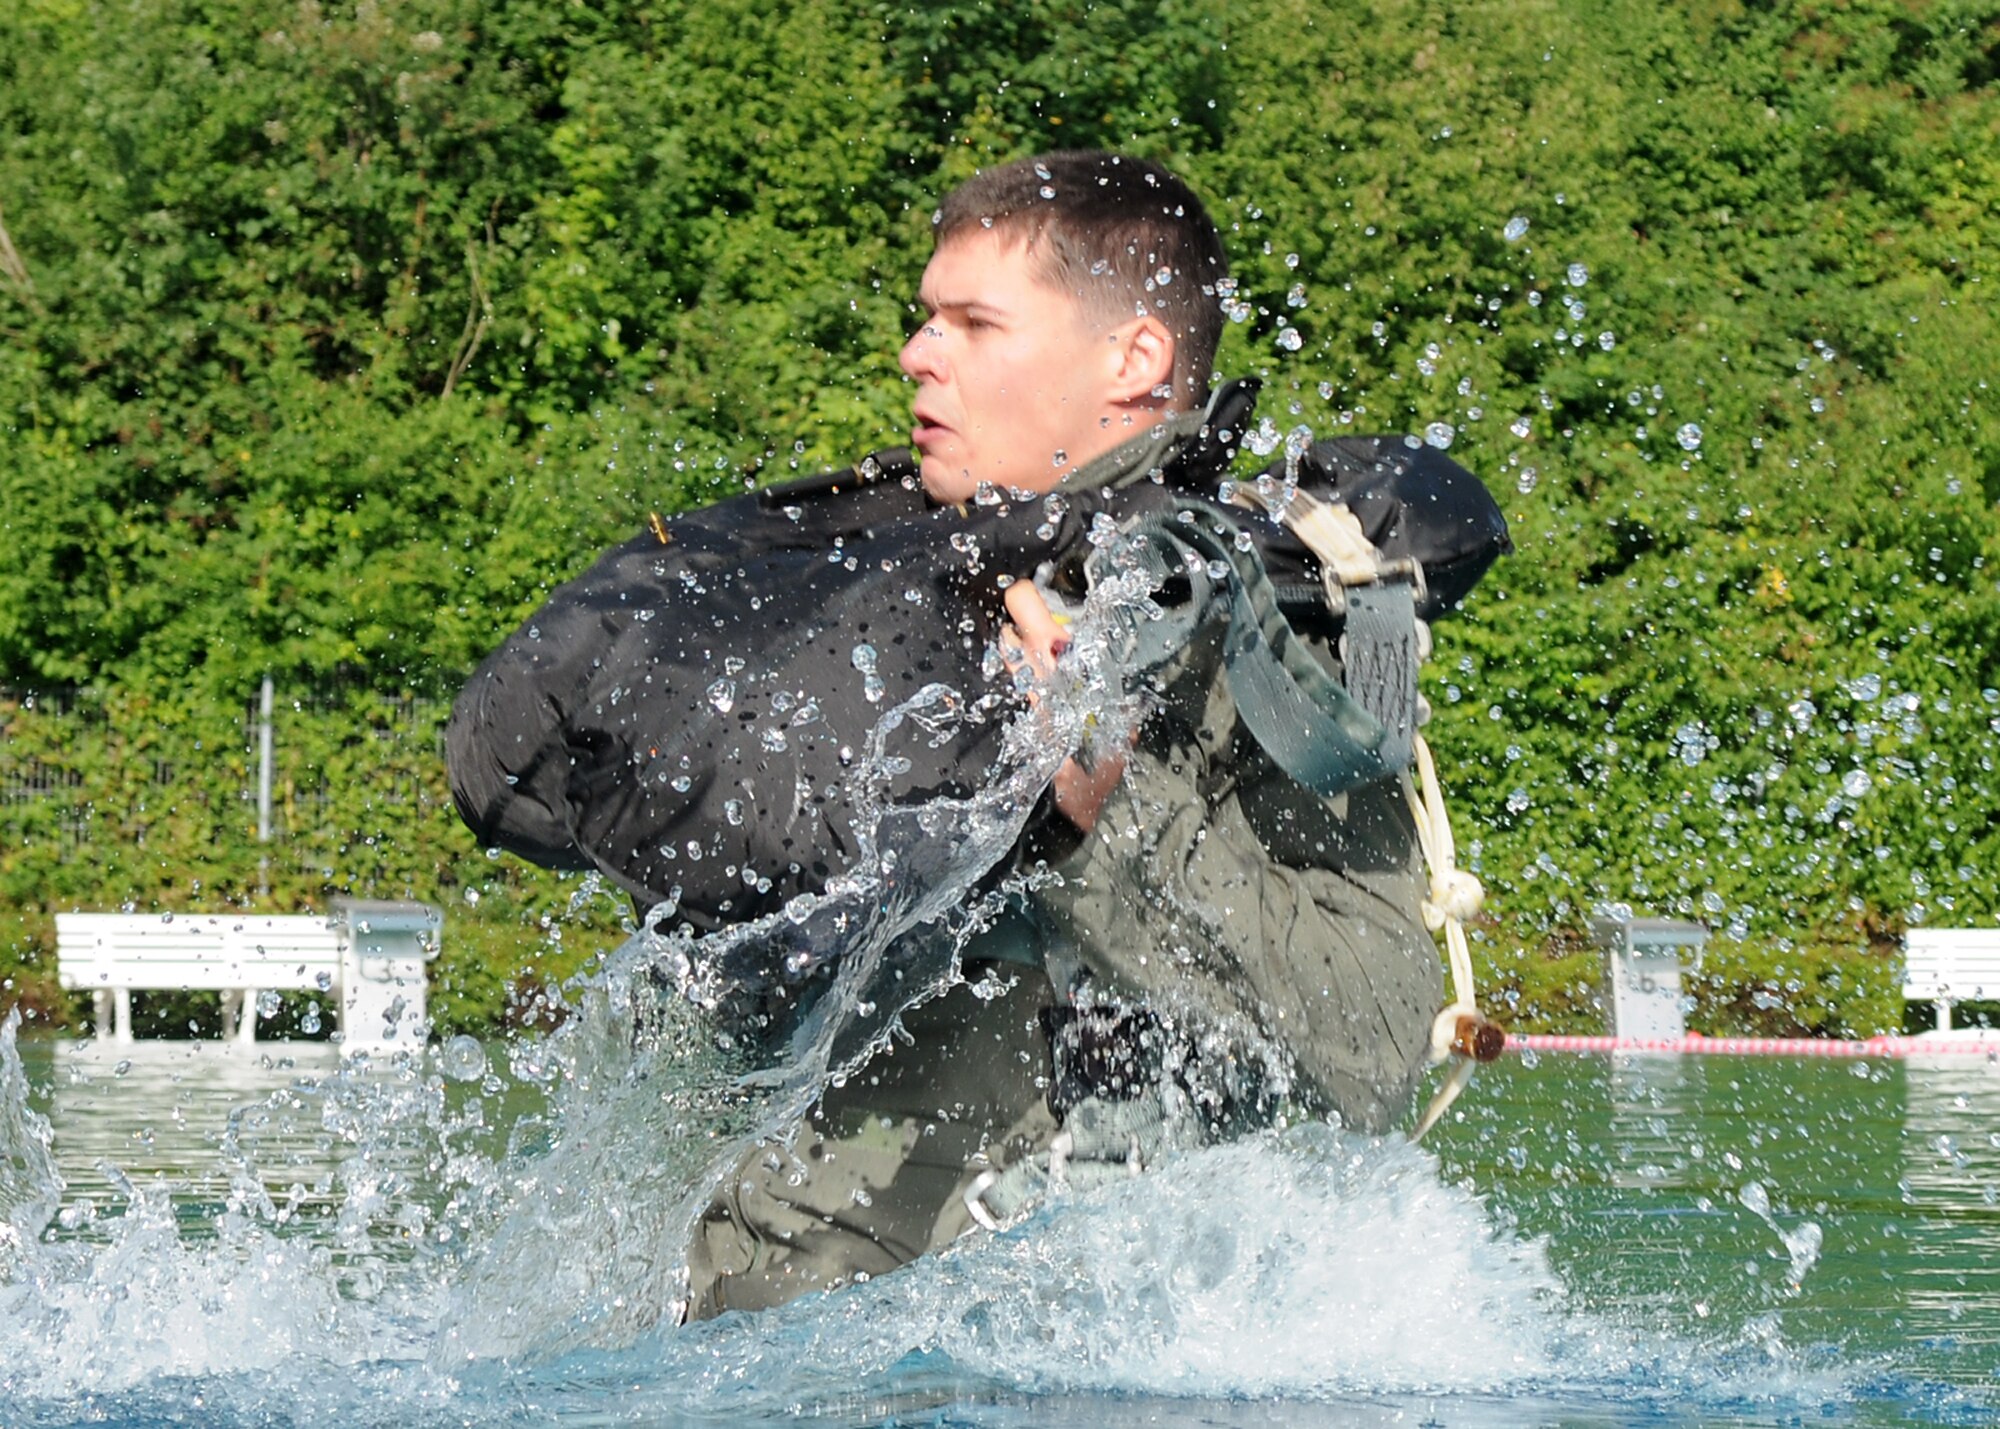 SPANGDAHLEM AIR BASE, Germany – Capt. Timothy Riley, 480th Fighter Squadron F-16 Fighting Falcon pilot, surfaces after a scenario designed to simulate being dragged in the water by a parachute during water survival training Aug. 20.  Water survival is one part of recurring survival, evasion, resistance and escape training and is tailored to conditions pilots from Spangdahlem might face flying over the North Atlantic Ocean.  (U.S. Air Force photo/Staff Sgt. Logan Tuttle)  